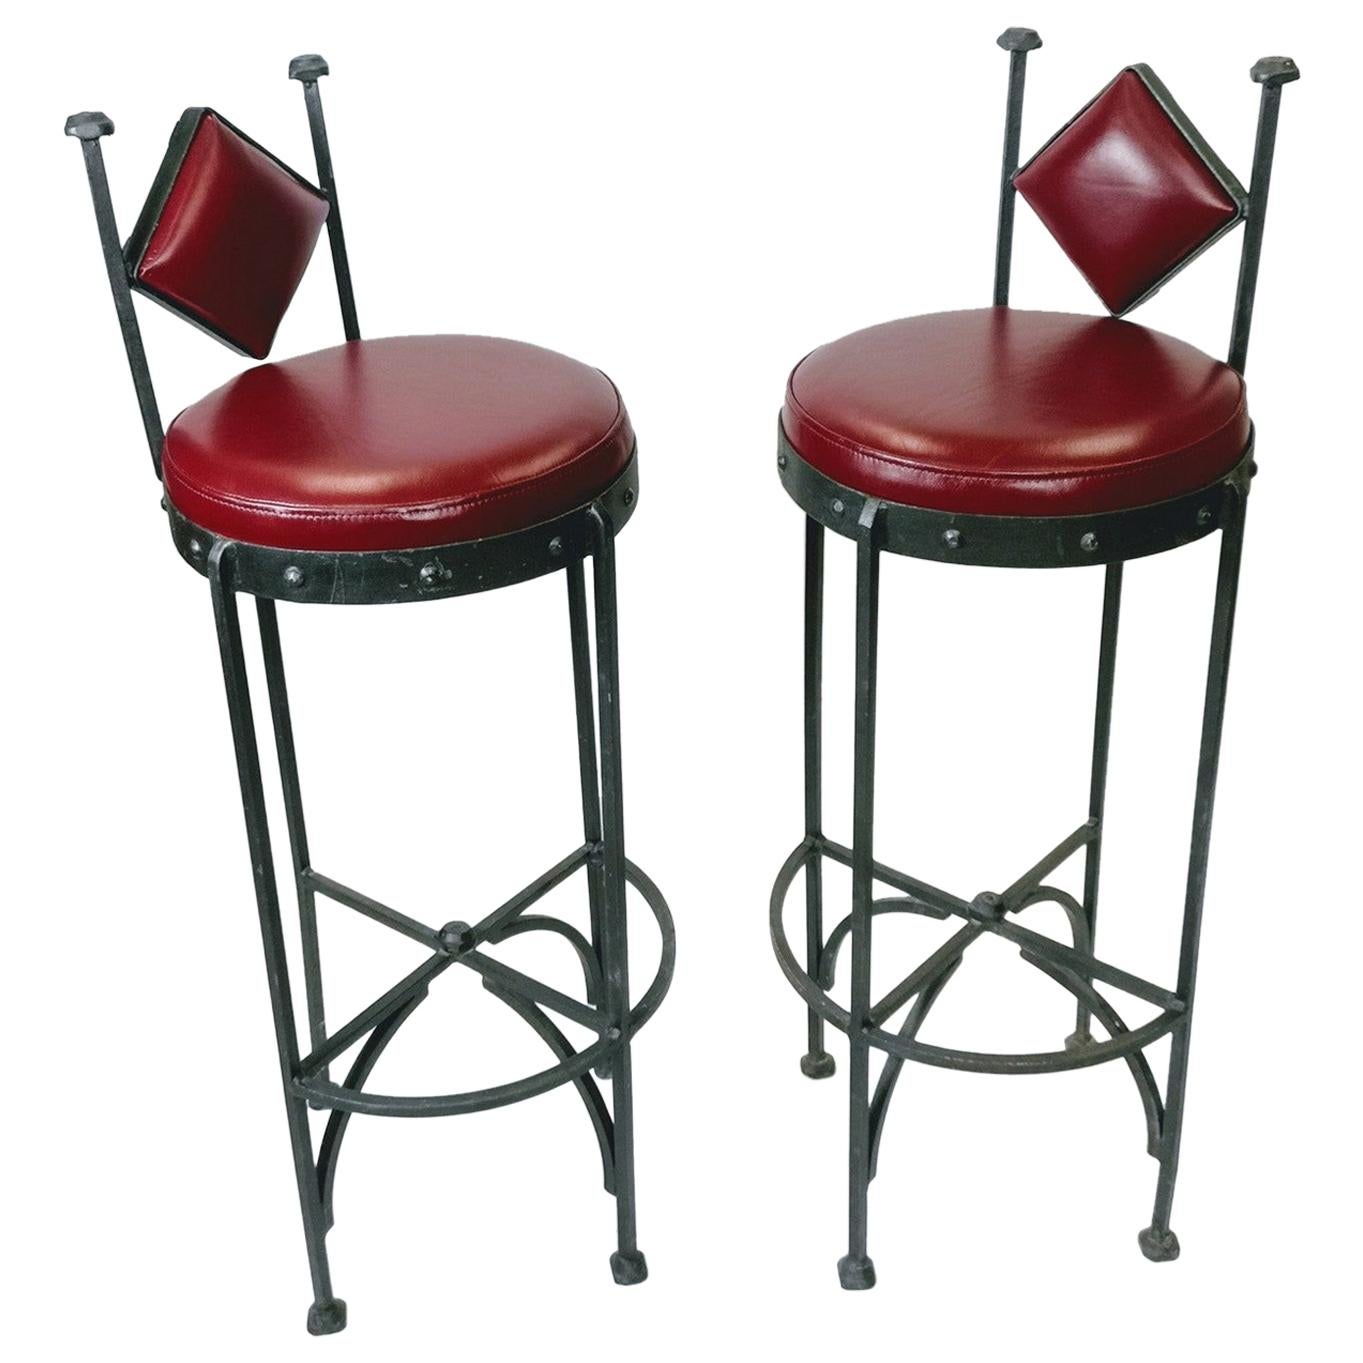 Handwrought Iron and Leather Vintage Bar Stools, 1970s